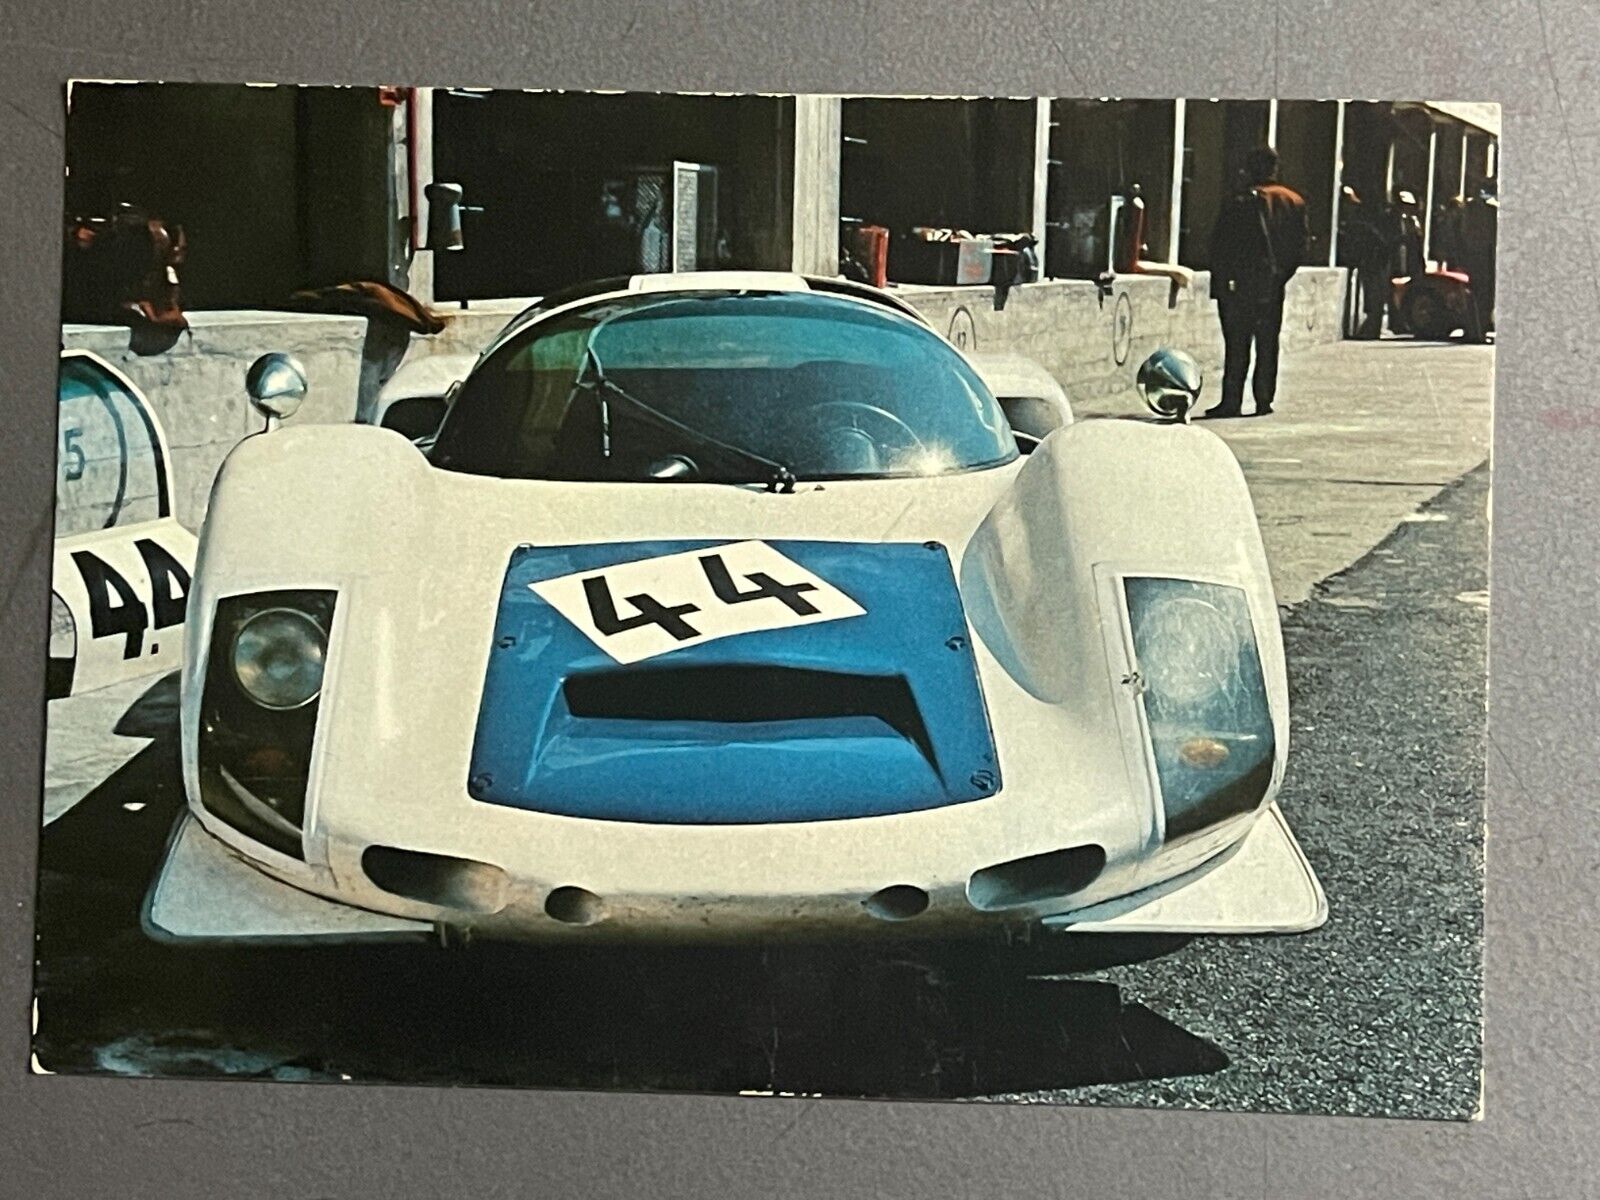 1966 Porsche Carrera 6 Type 906 Factory Issued Postcard ULTRA RARE Awesome L@@K